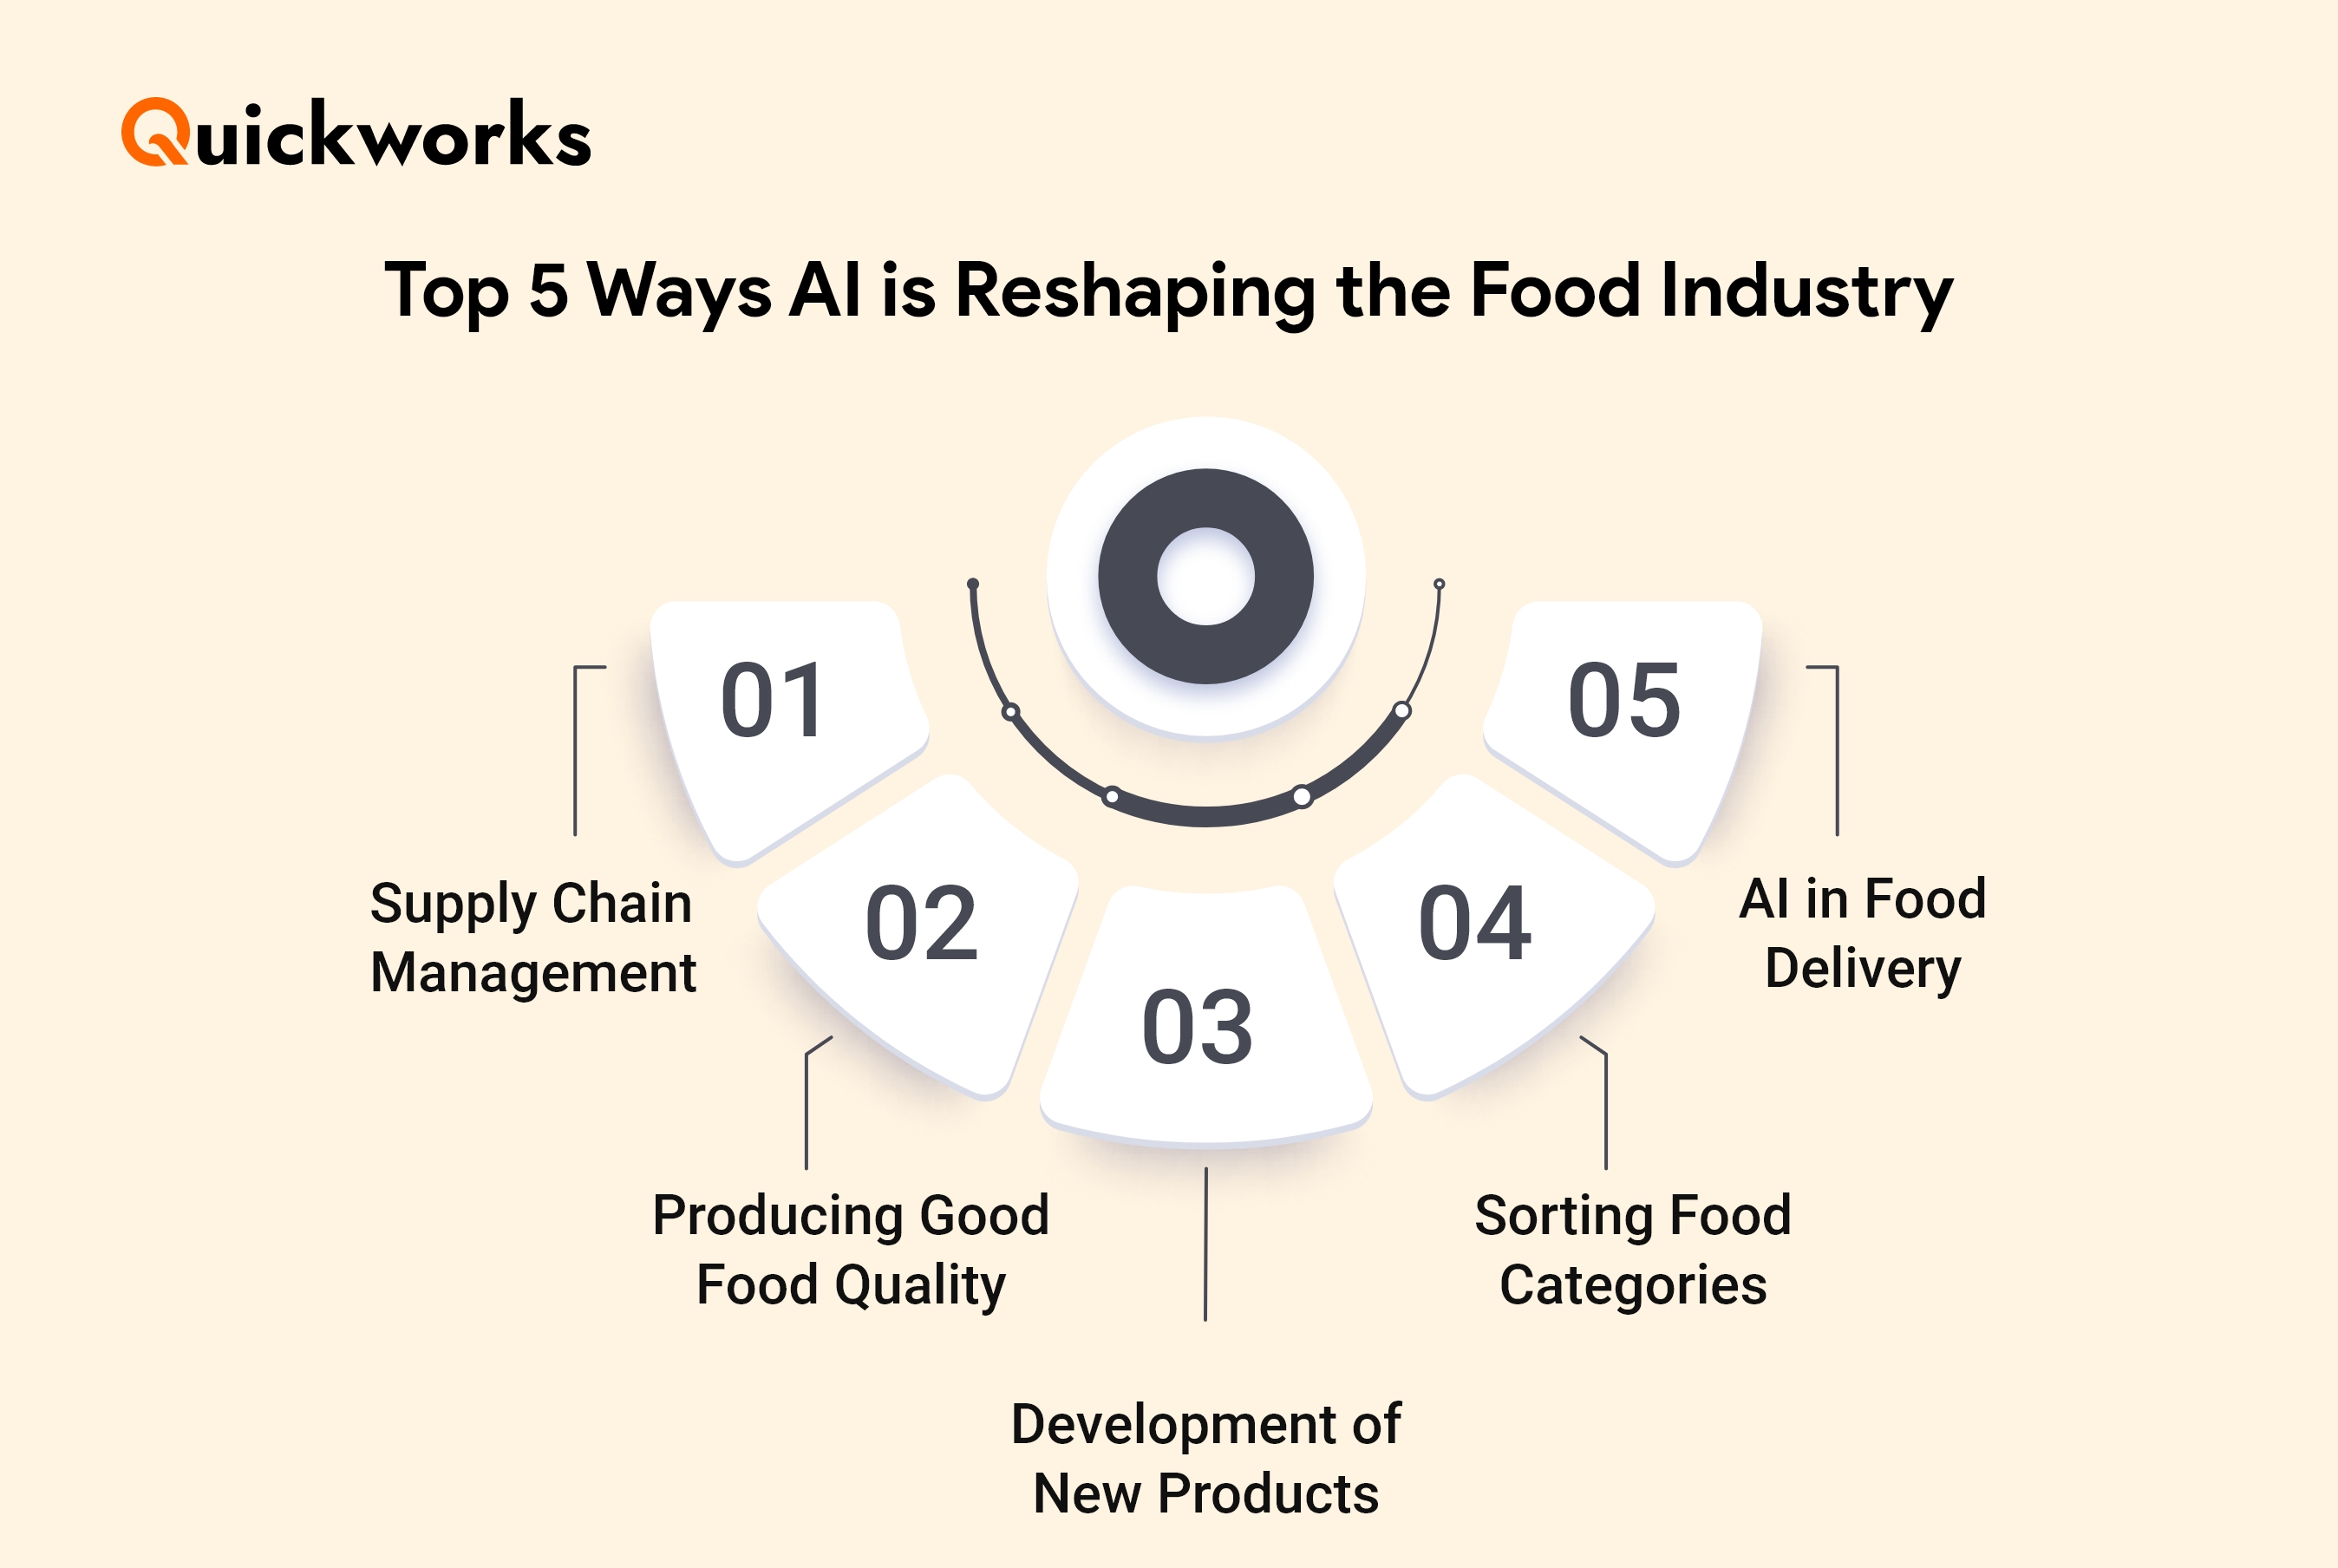 Impact of AI on Food Delivery